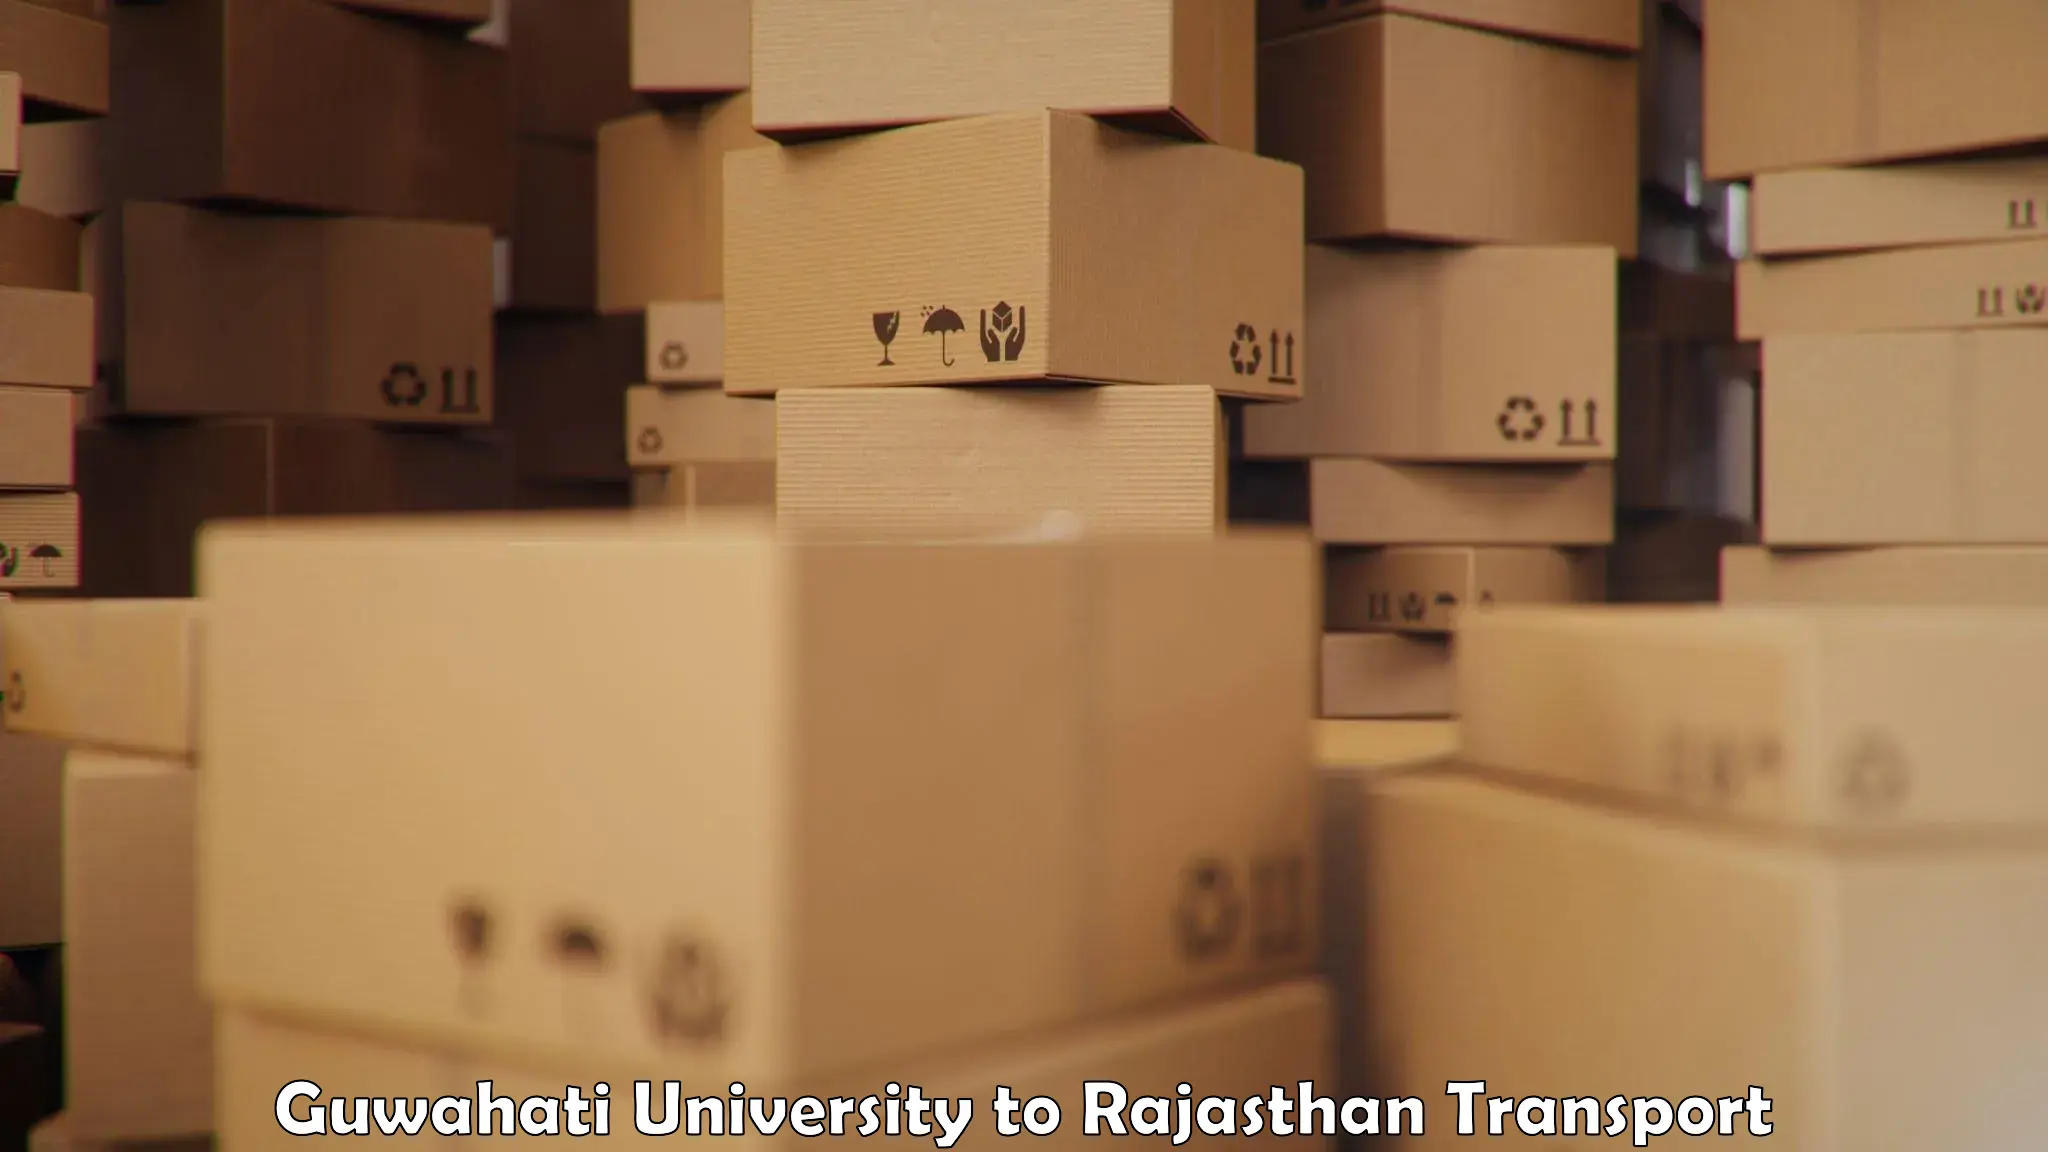 Road transport online services Guwahati University to Barmer